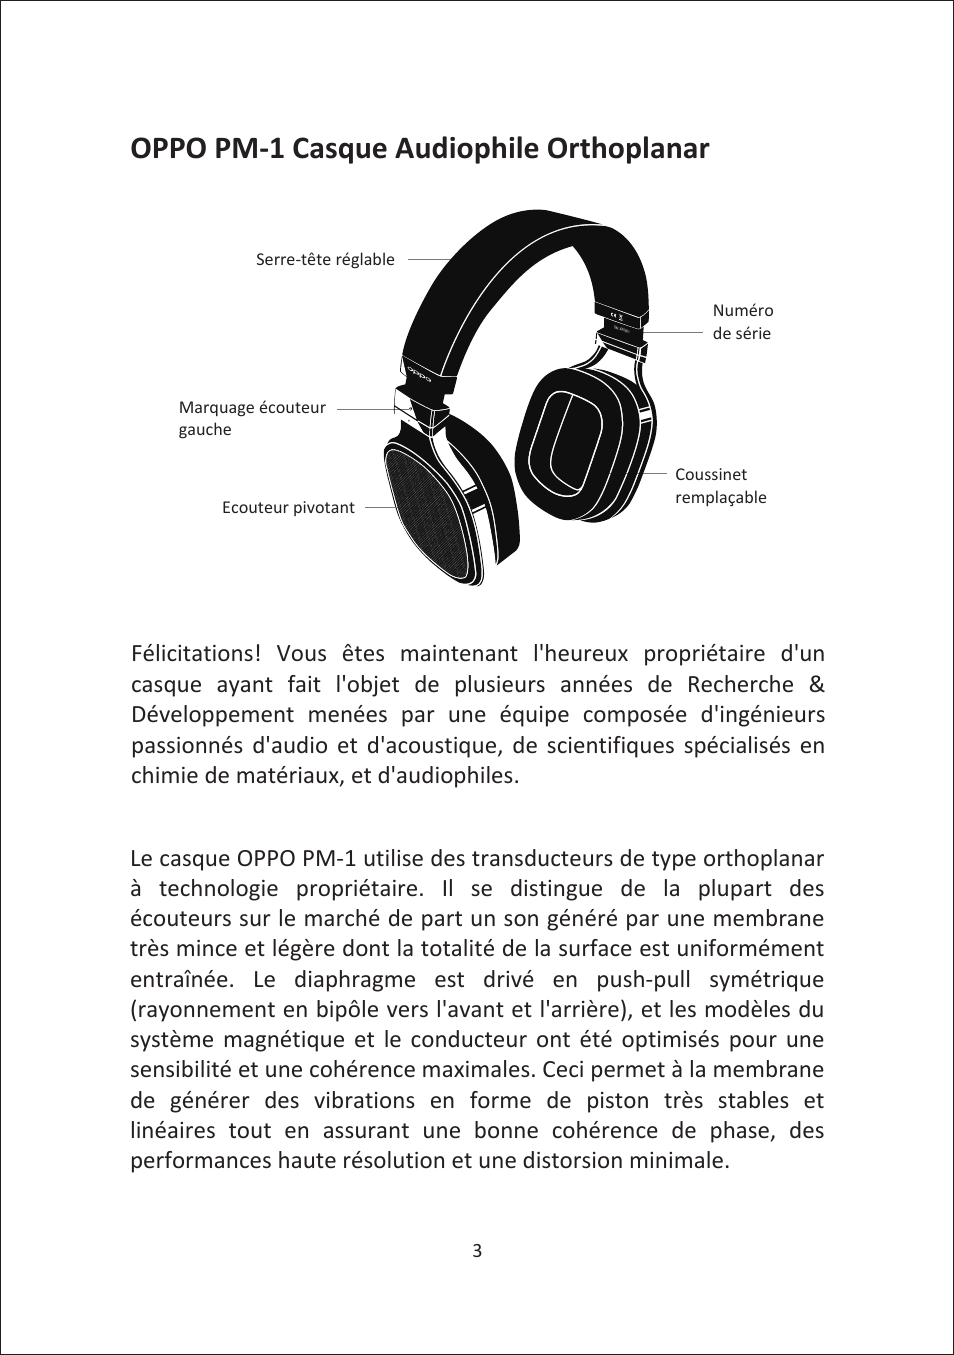 Oppo pm-1 casque audiophile orthoplanar | Oppo PM-1 Manuel d'utilisation | Page 5 / 11